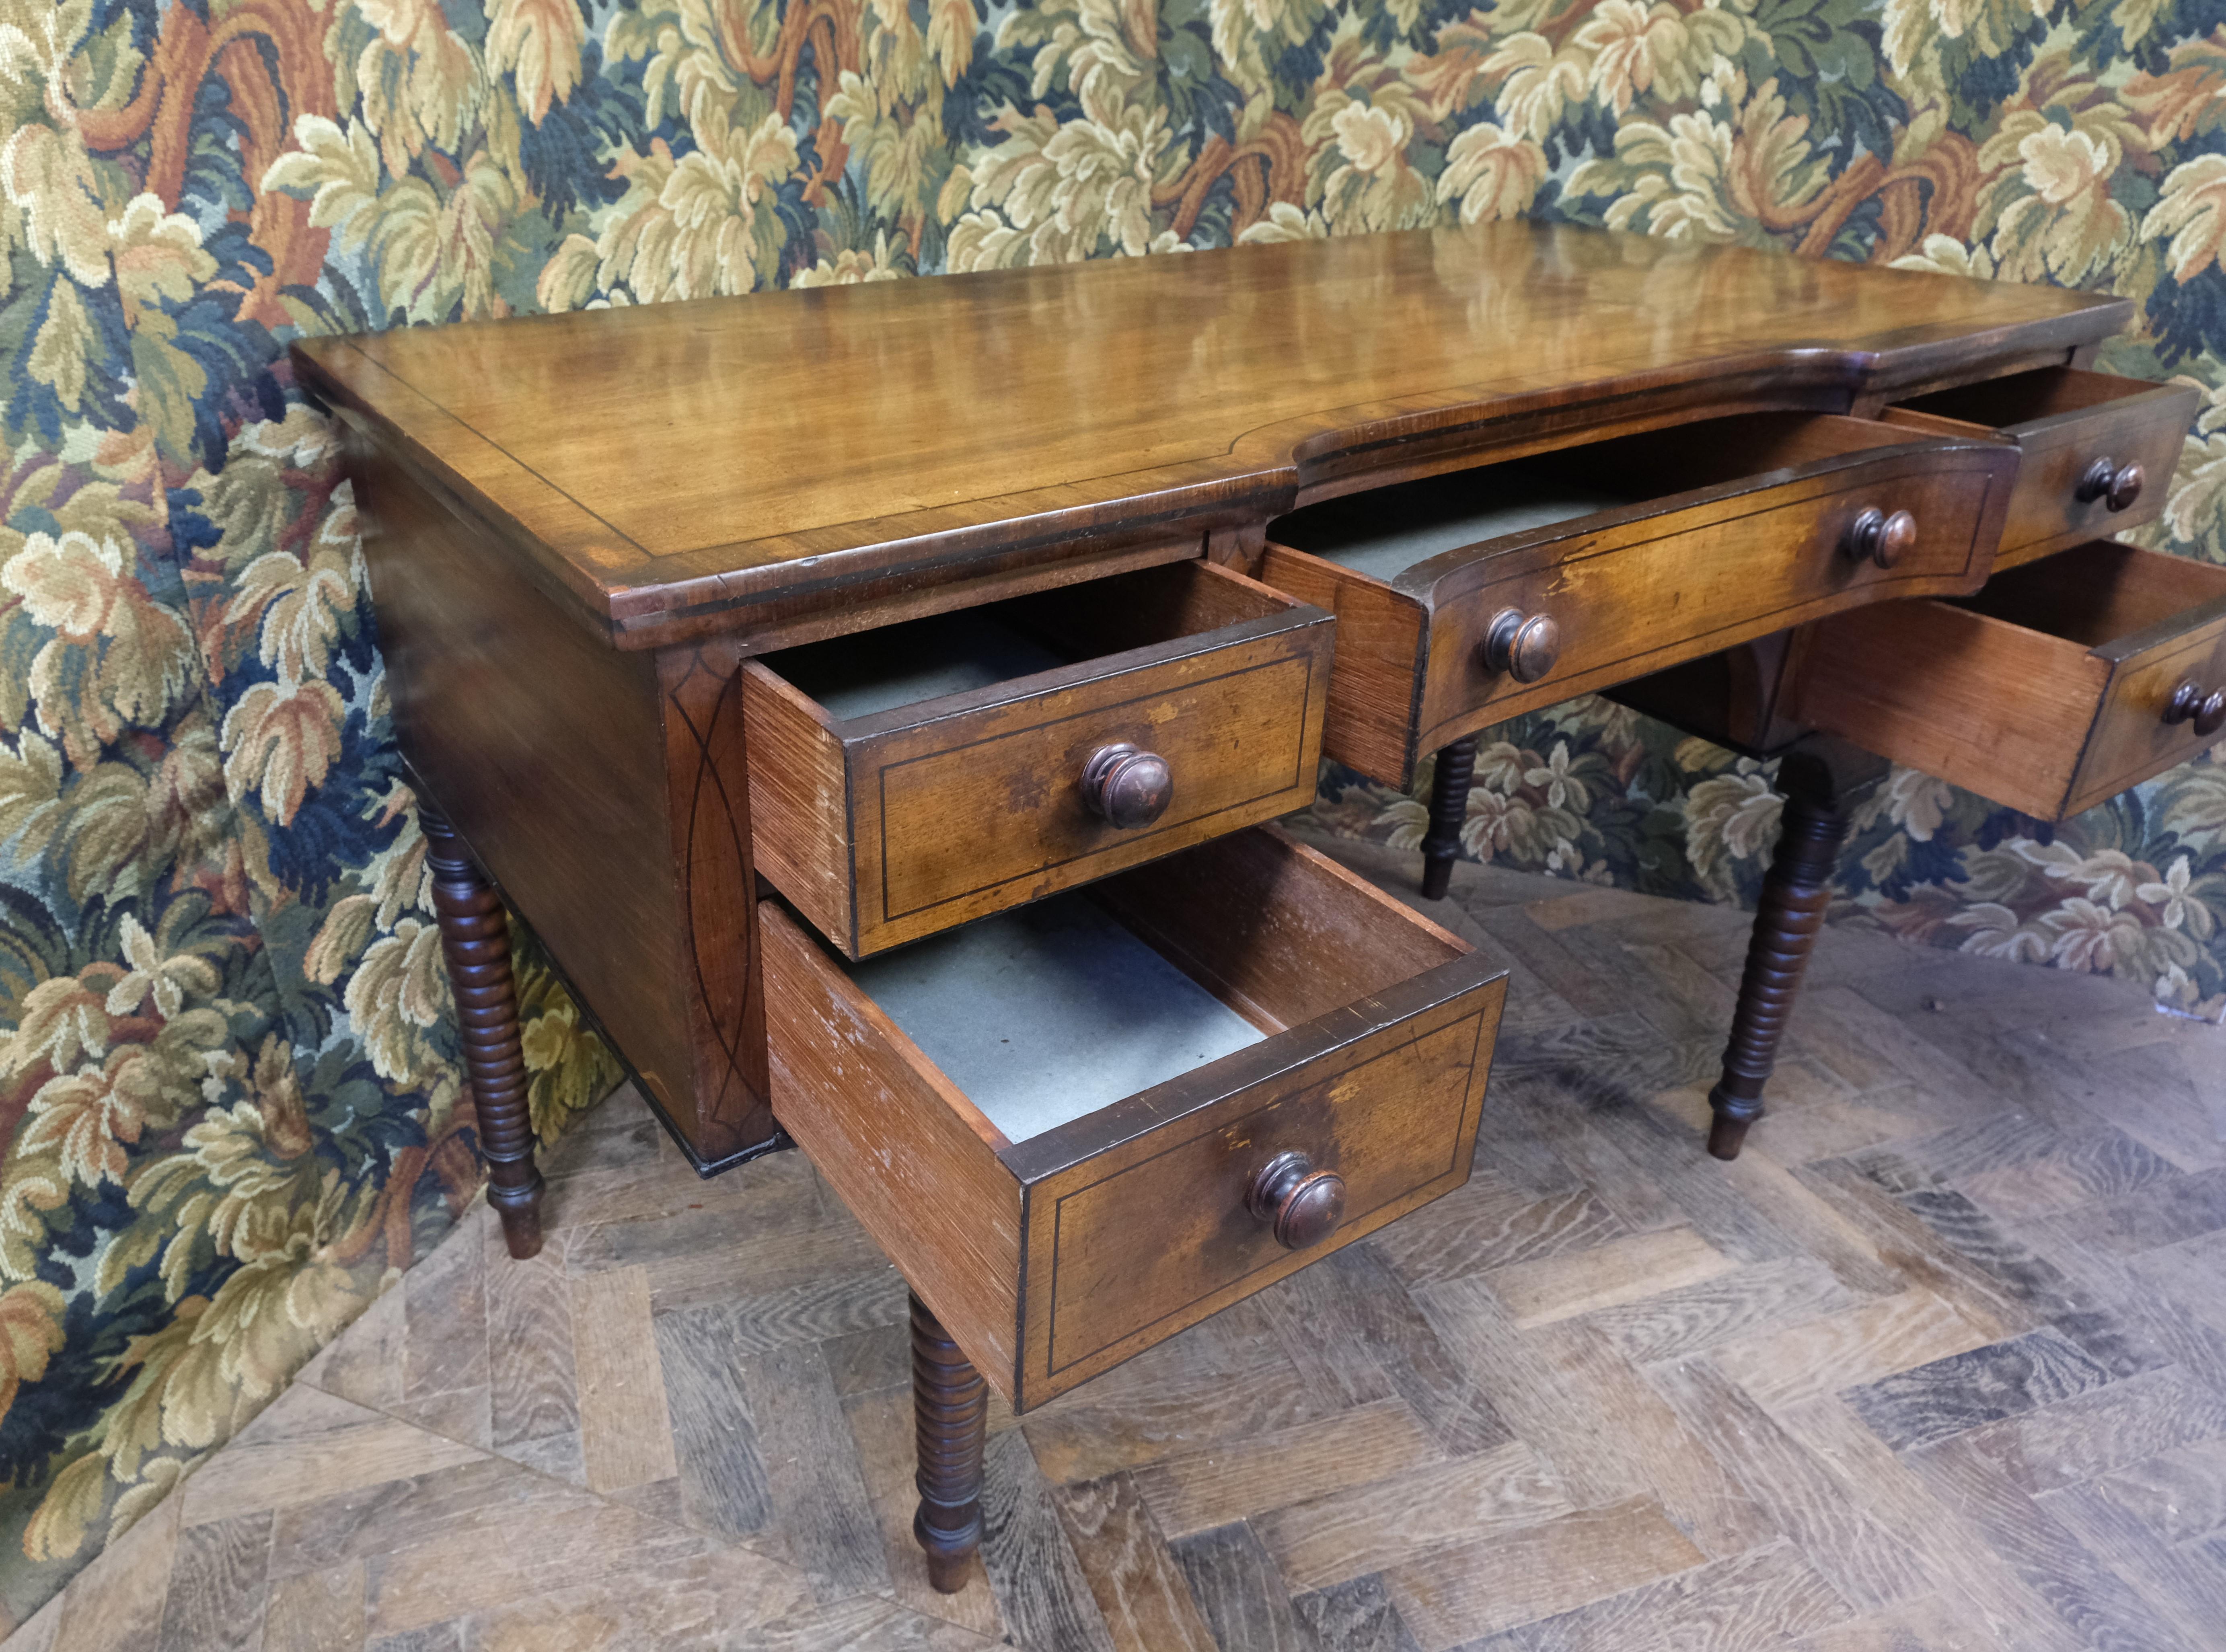 Hutton-Clarke Antiques is thrilled to showcase a distinguished and rare Regency Dressing Table from circa 1800, boasting exquisite craftsmanship in fine mahogany with solid drawer linings. This piece captivates with its figured timber top, elegantly